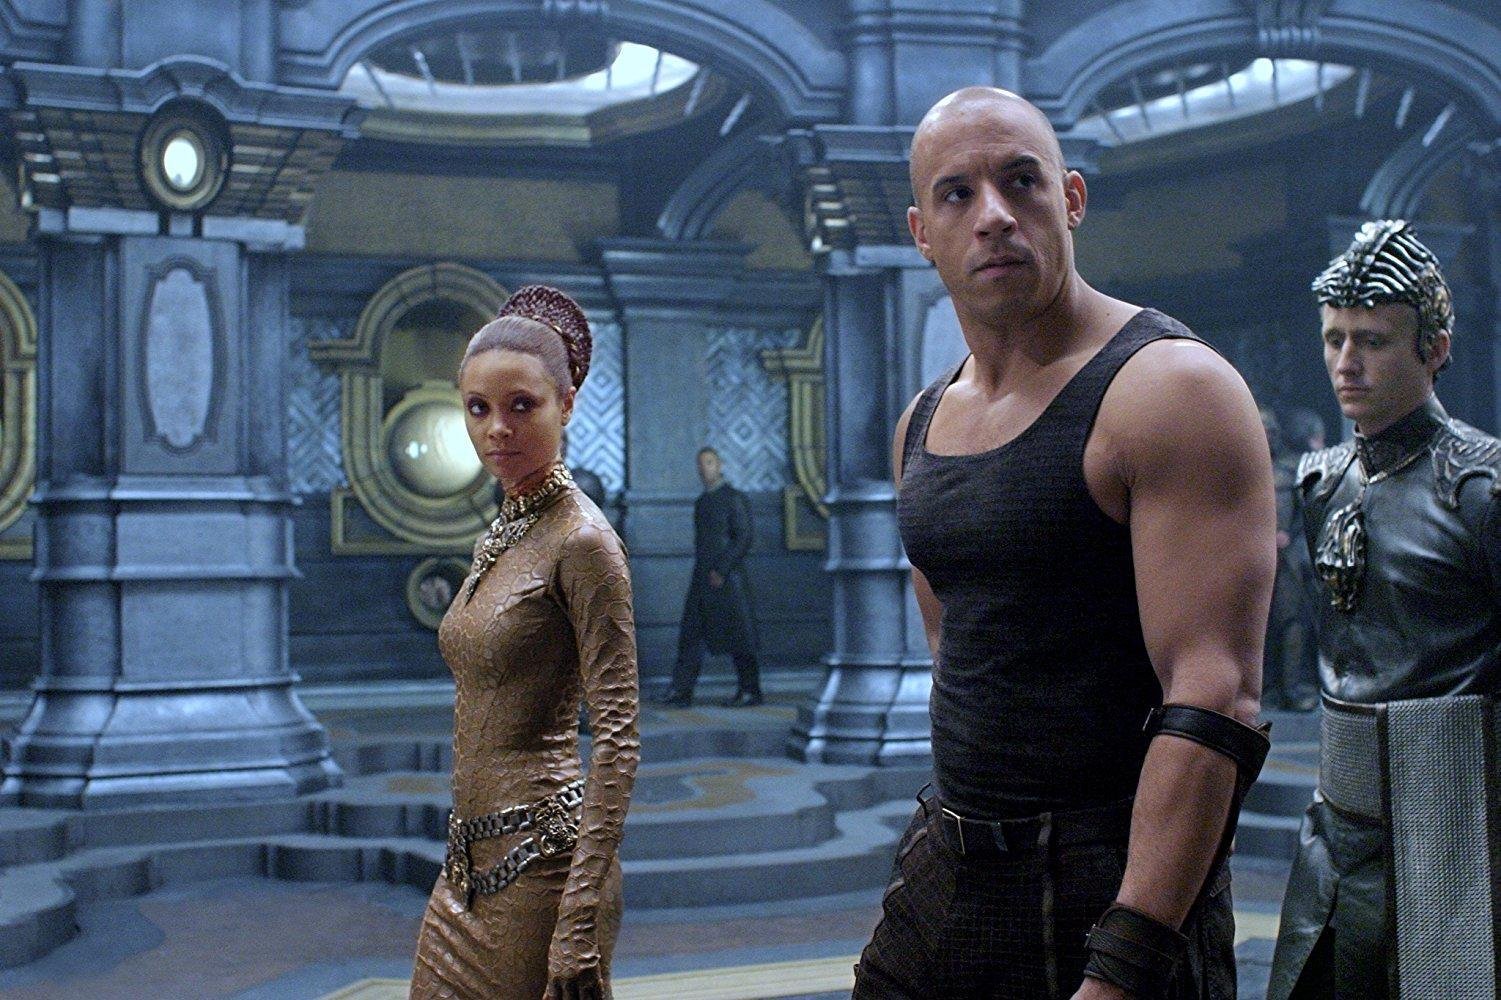 Is Riddick part of the Marvel universe?